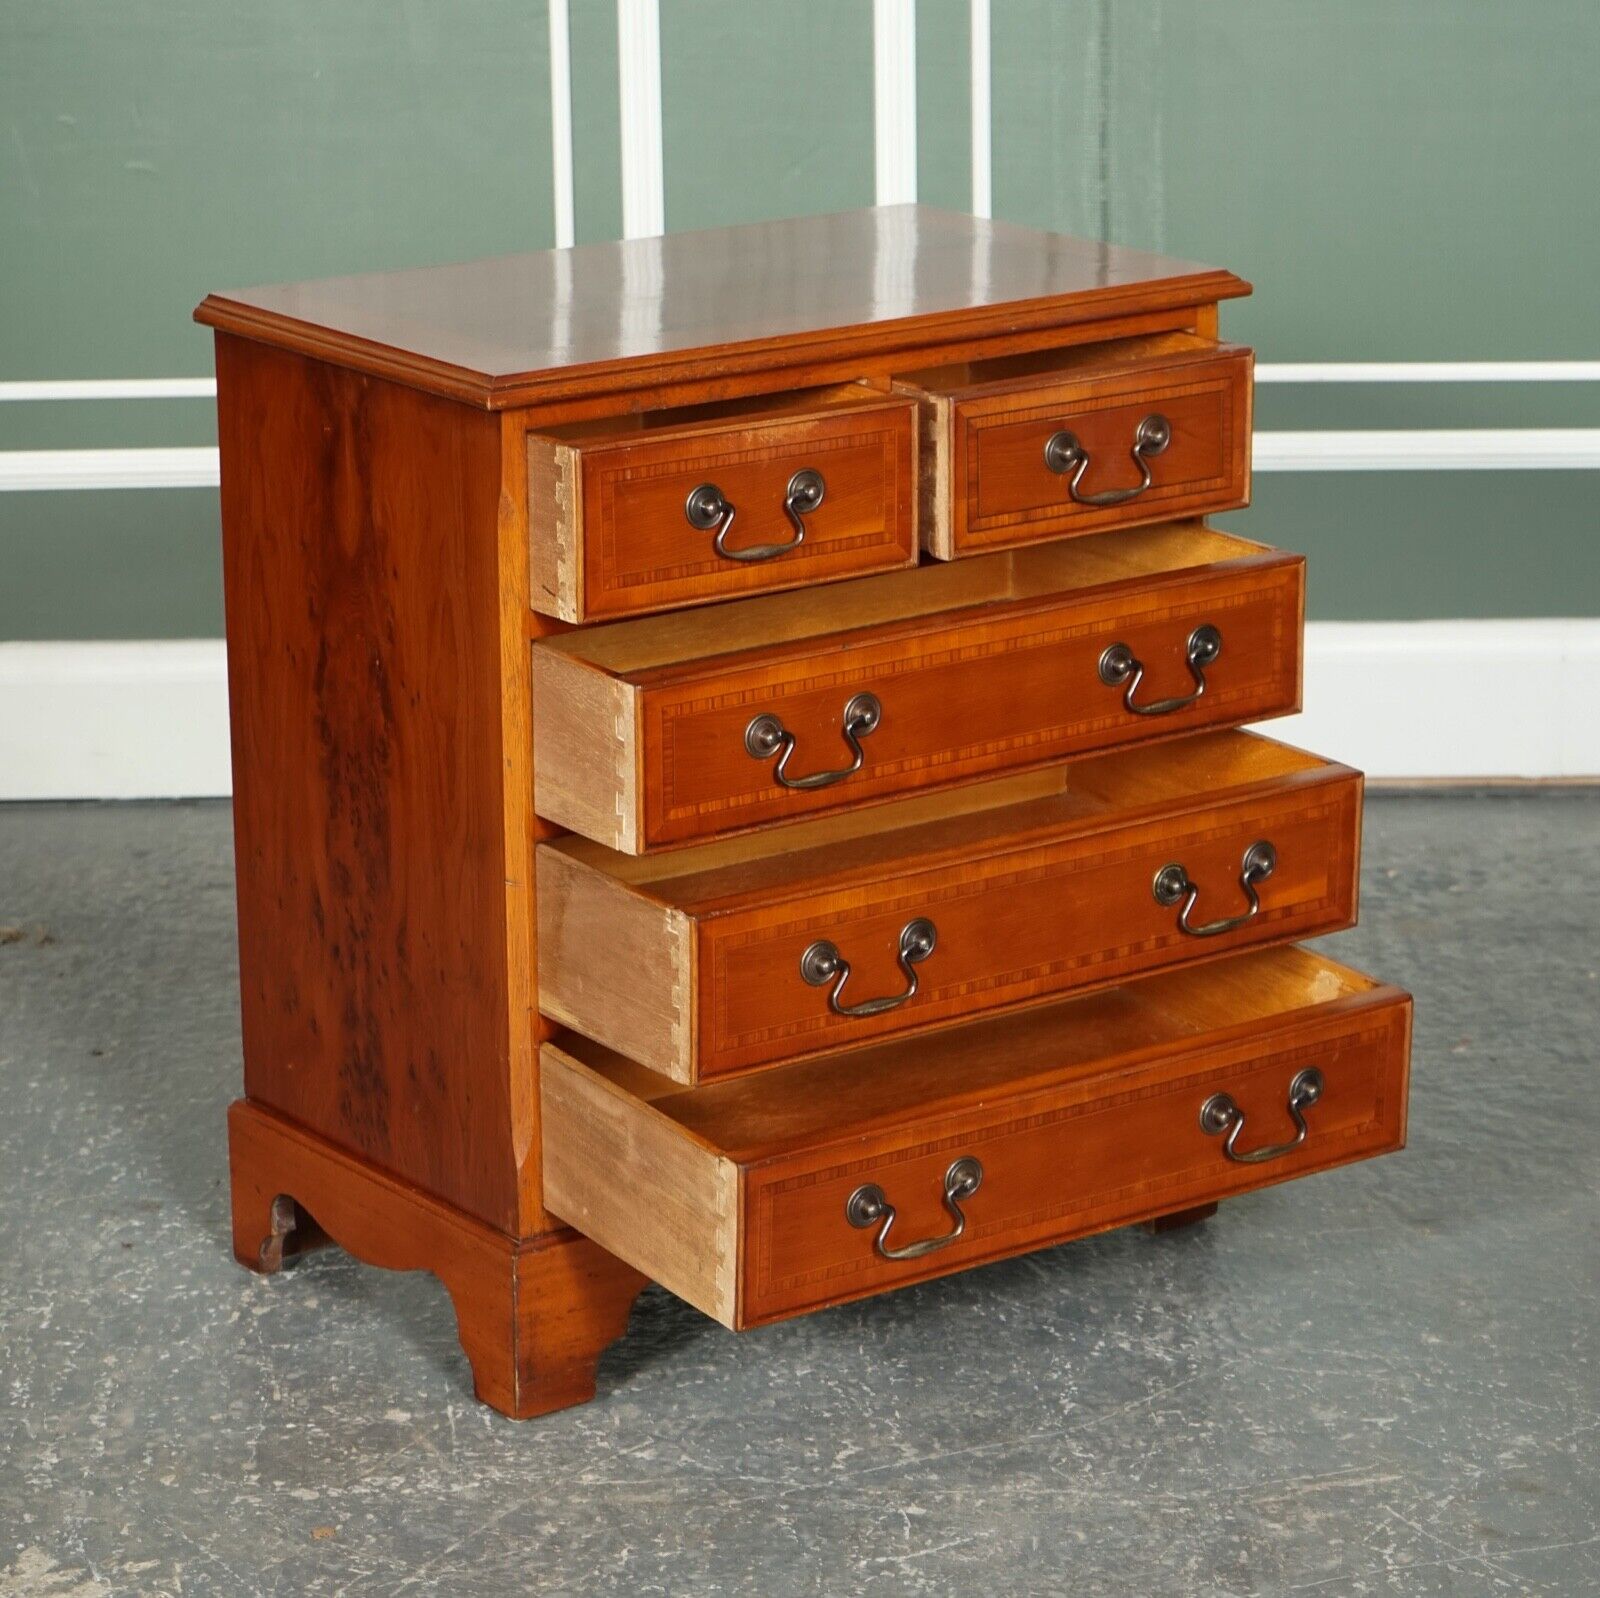 LOVELY YEW WOOD GEORGIAN STYLE CHEST OF DRAWERS BRASS HANDLES